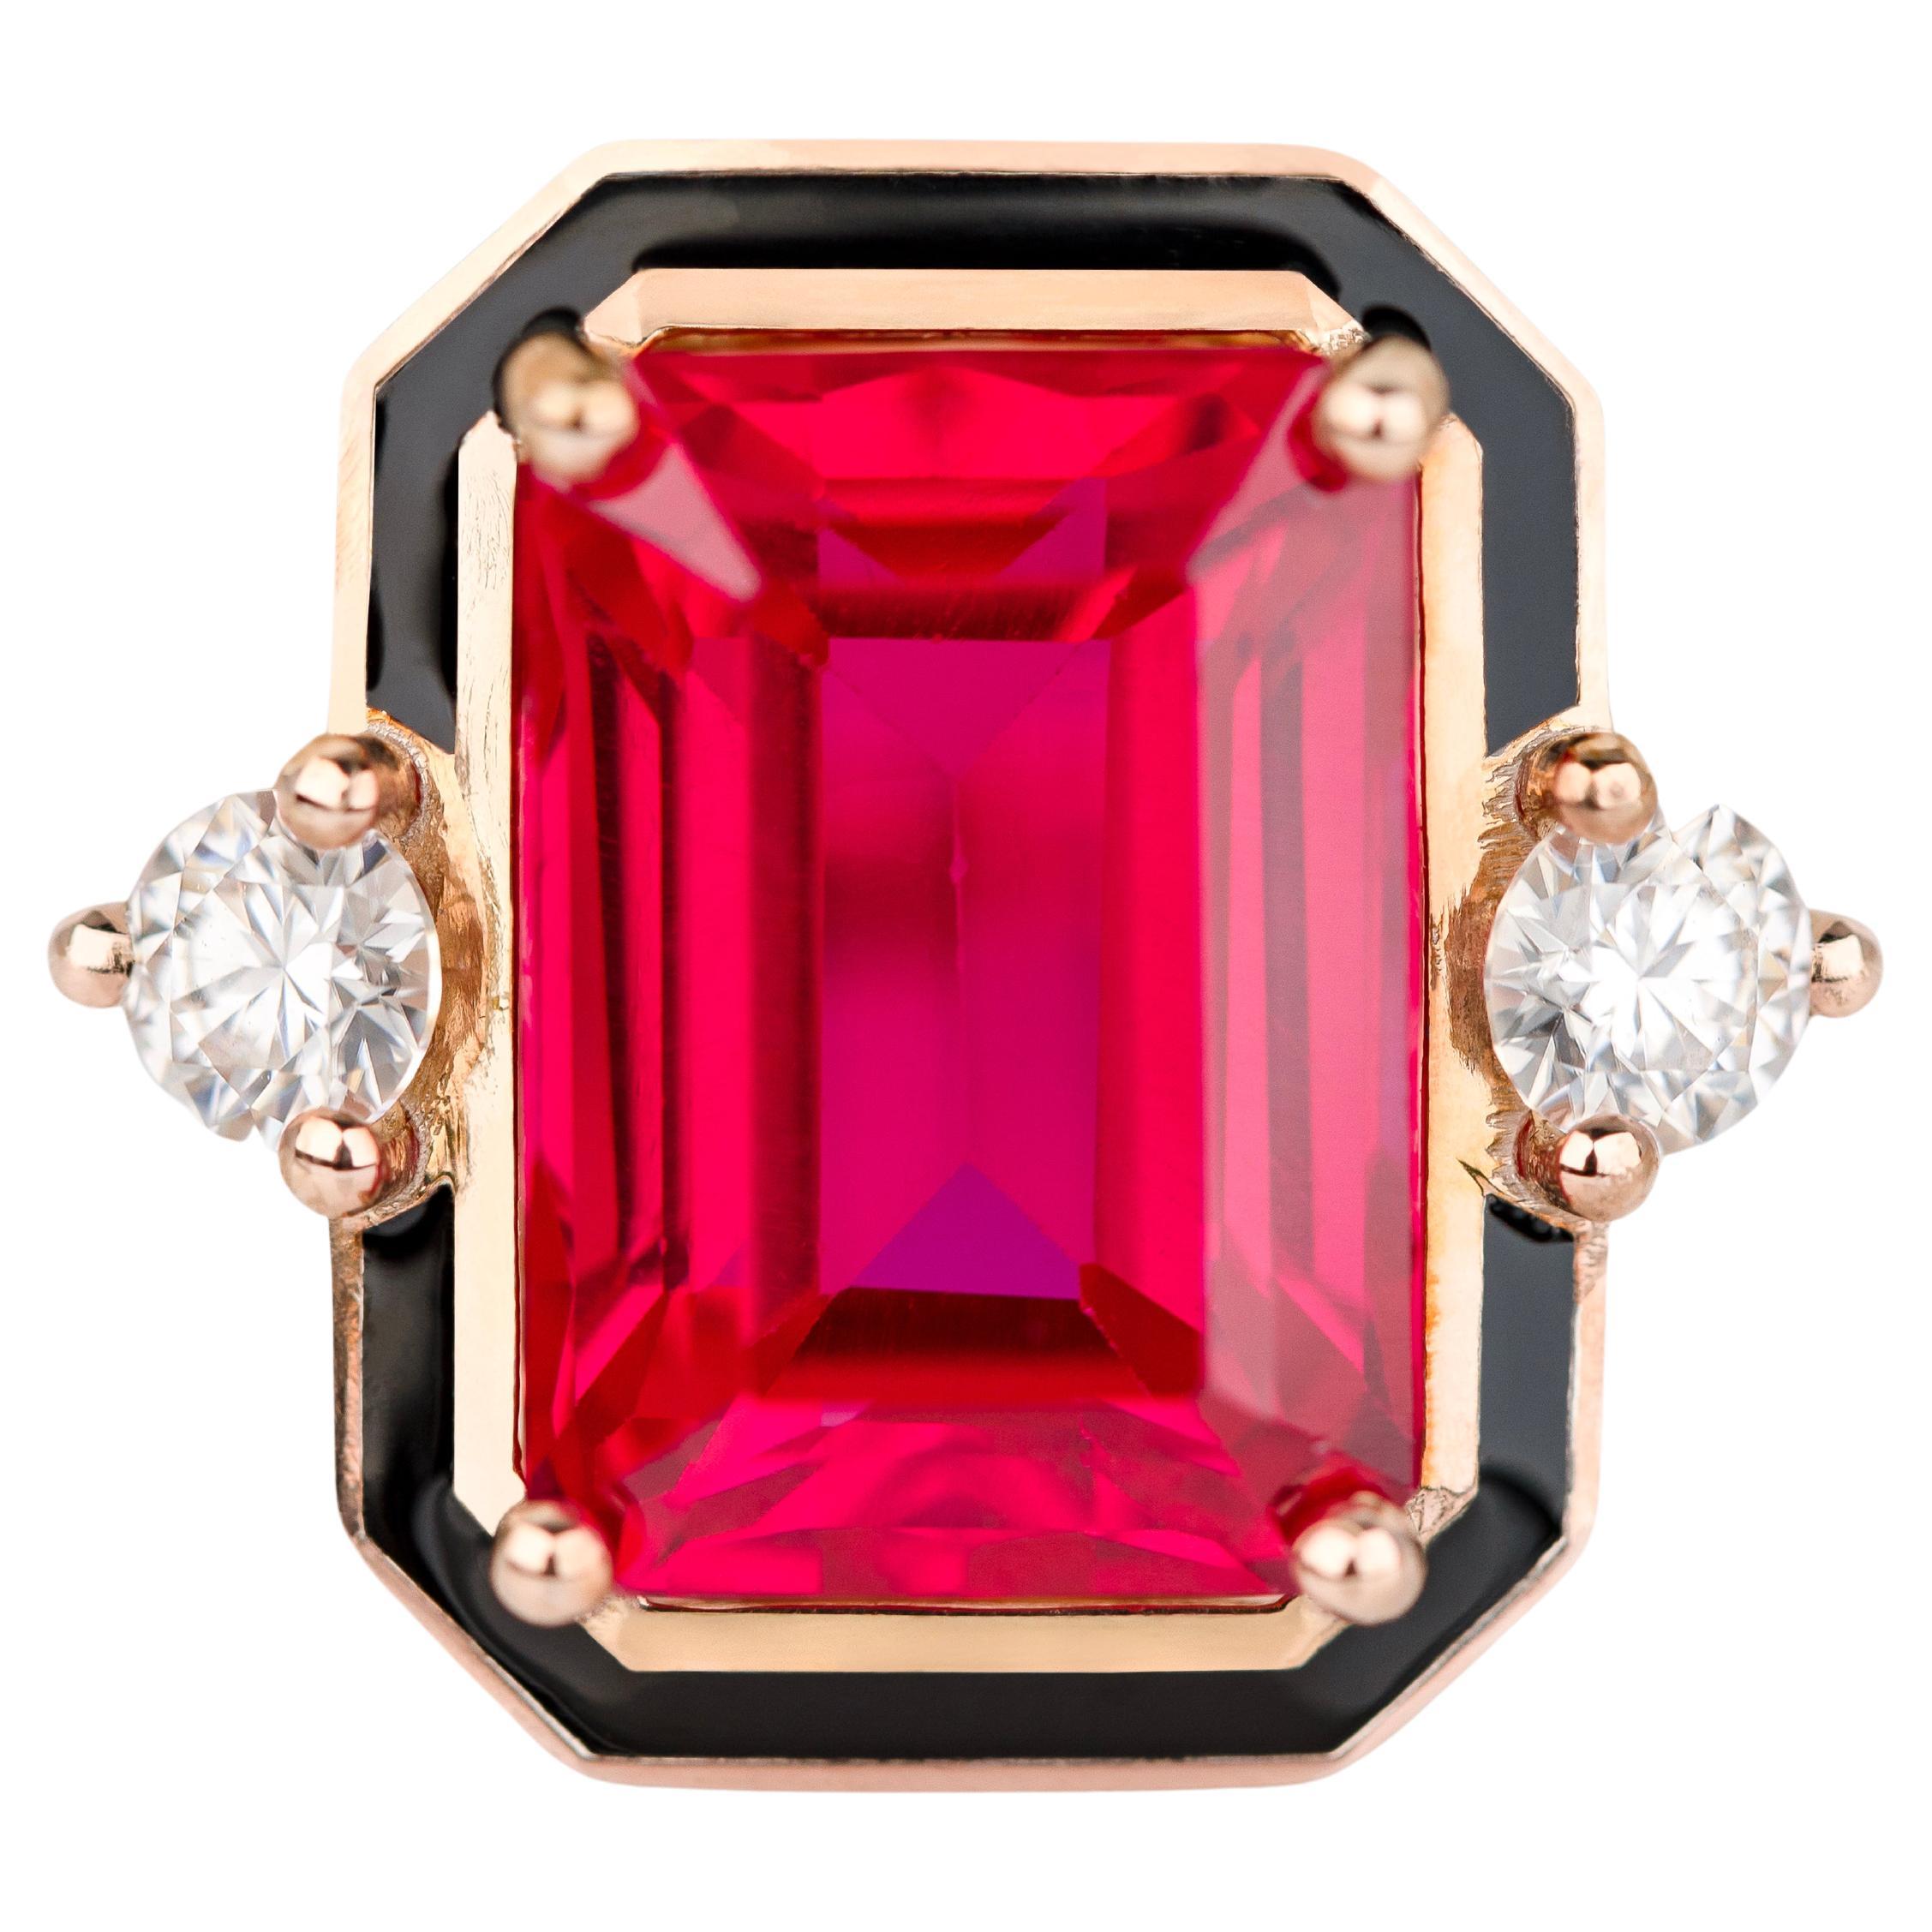 Art Deco Style Ring, Synthetic Ruby and Moissanite Stone Ring, 14K Gold Ring